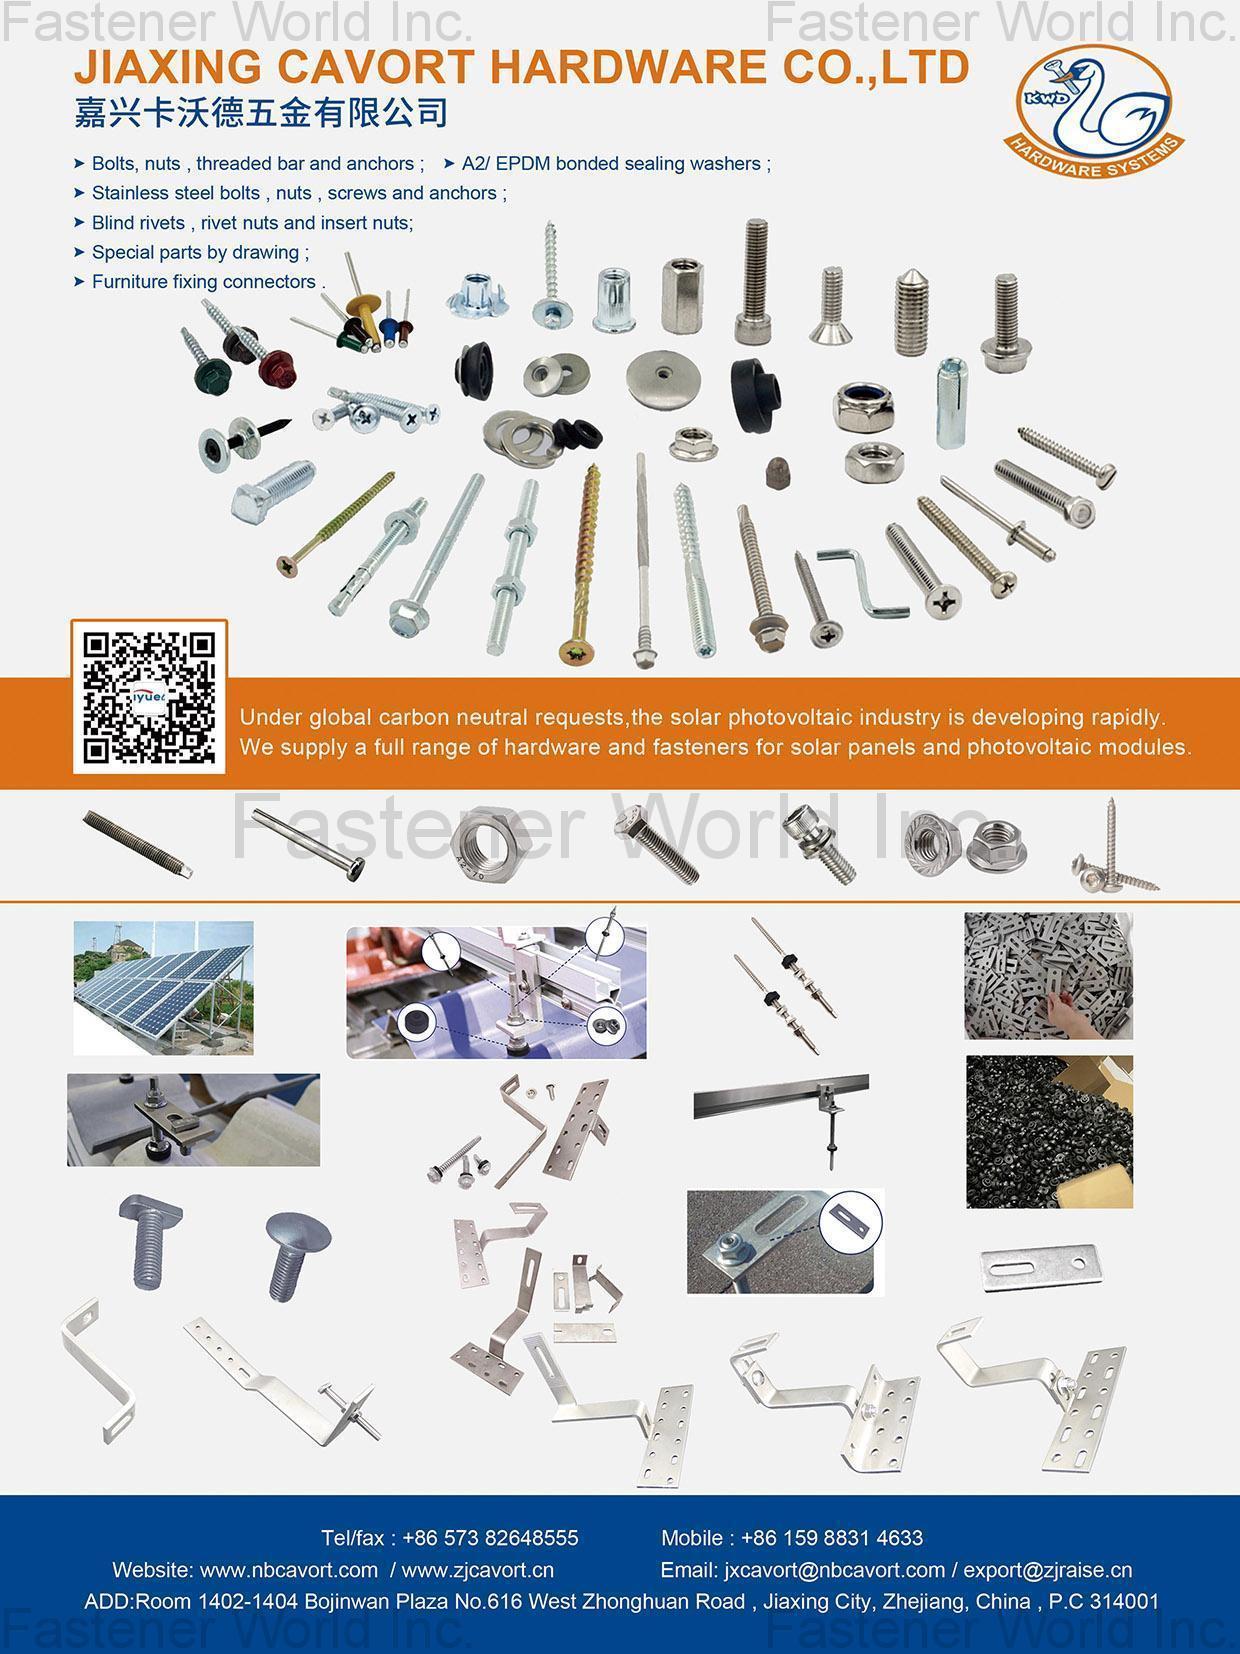 JIAXING CAVORT HARDWARE CO., LTD. , Bolts,nuts,threaded bar and anchors,A2/EPDM bonded sealing washers, Stainless steel bolts,nuts,screws and anchors,Blind rivets,rivet nuts and insert nuts, Special parts by drawing,Furniture fixing connectors